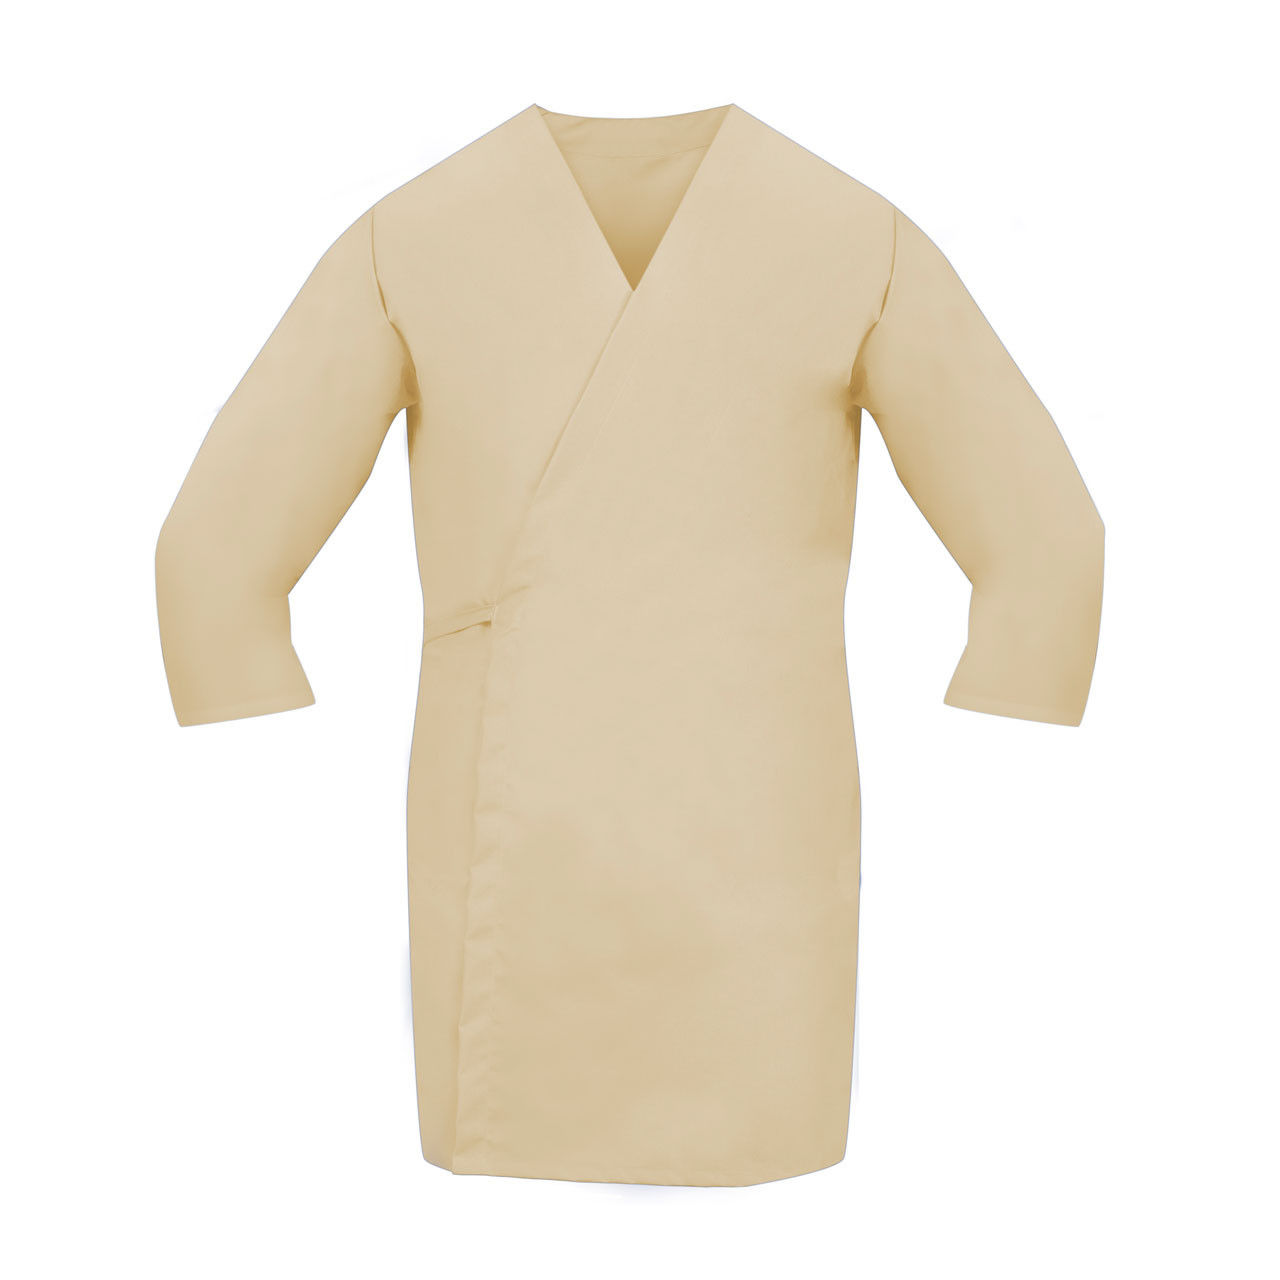 What are the Tan Smock Wraps made from?